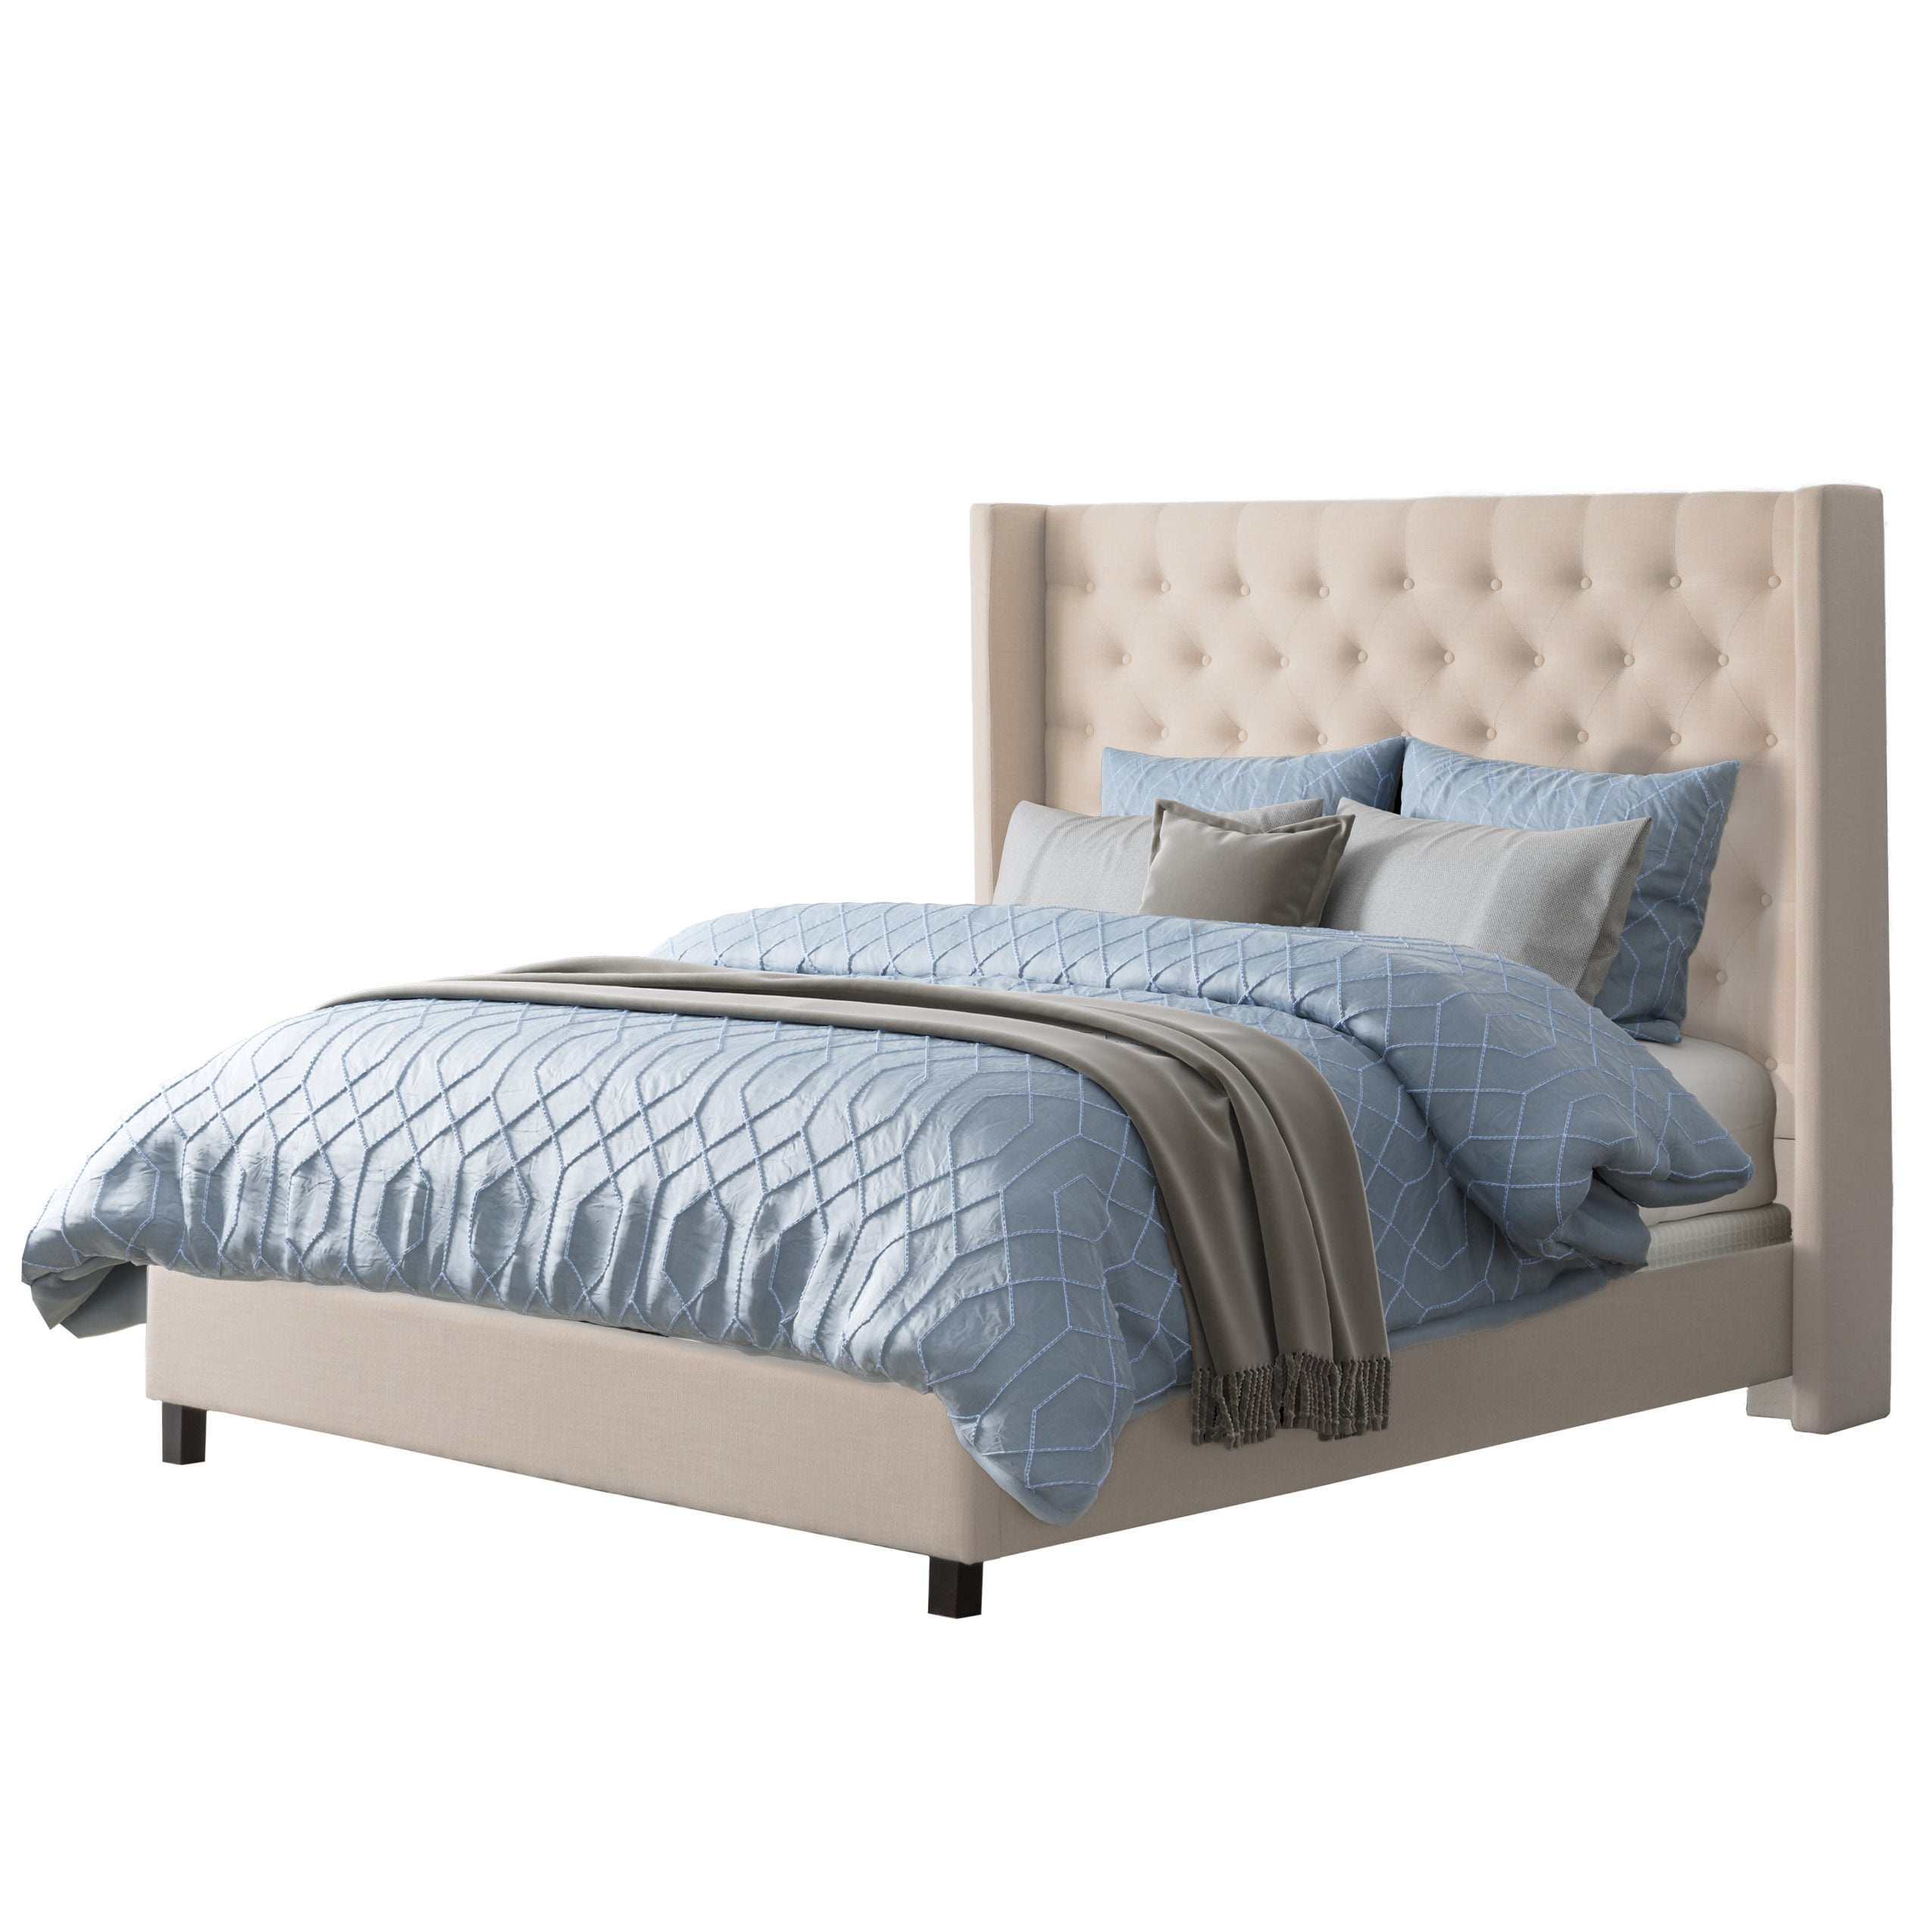 Corliving Fairfield Tufted Fabric Bed, Westerly Light Grey King Upholstered Bed Set